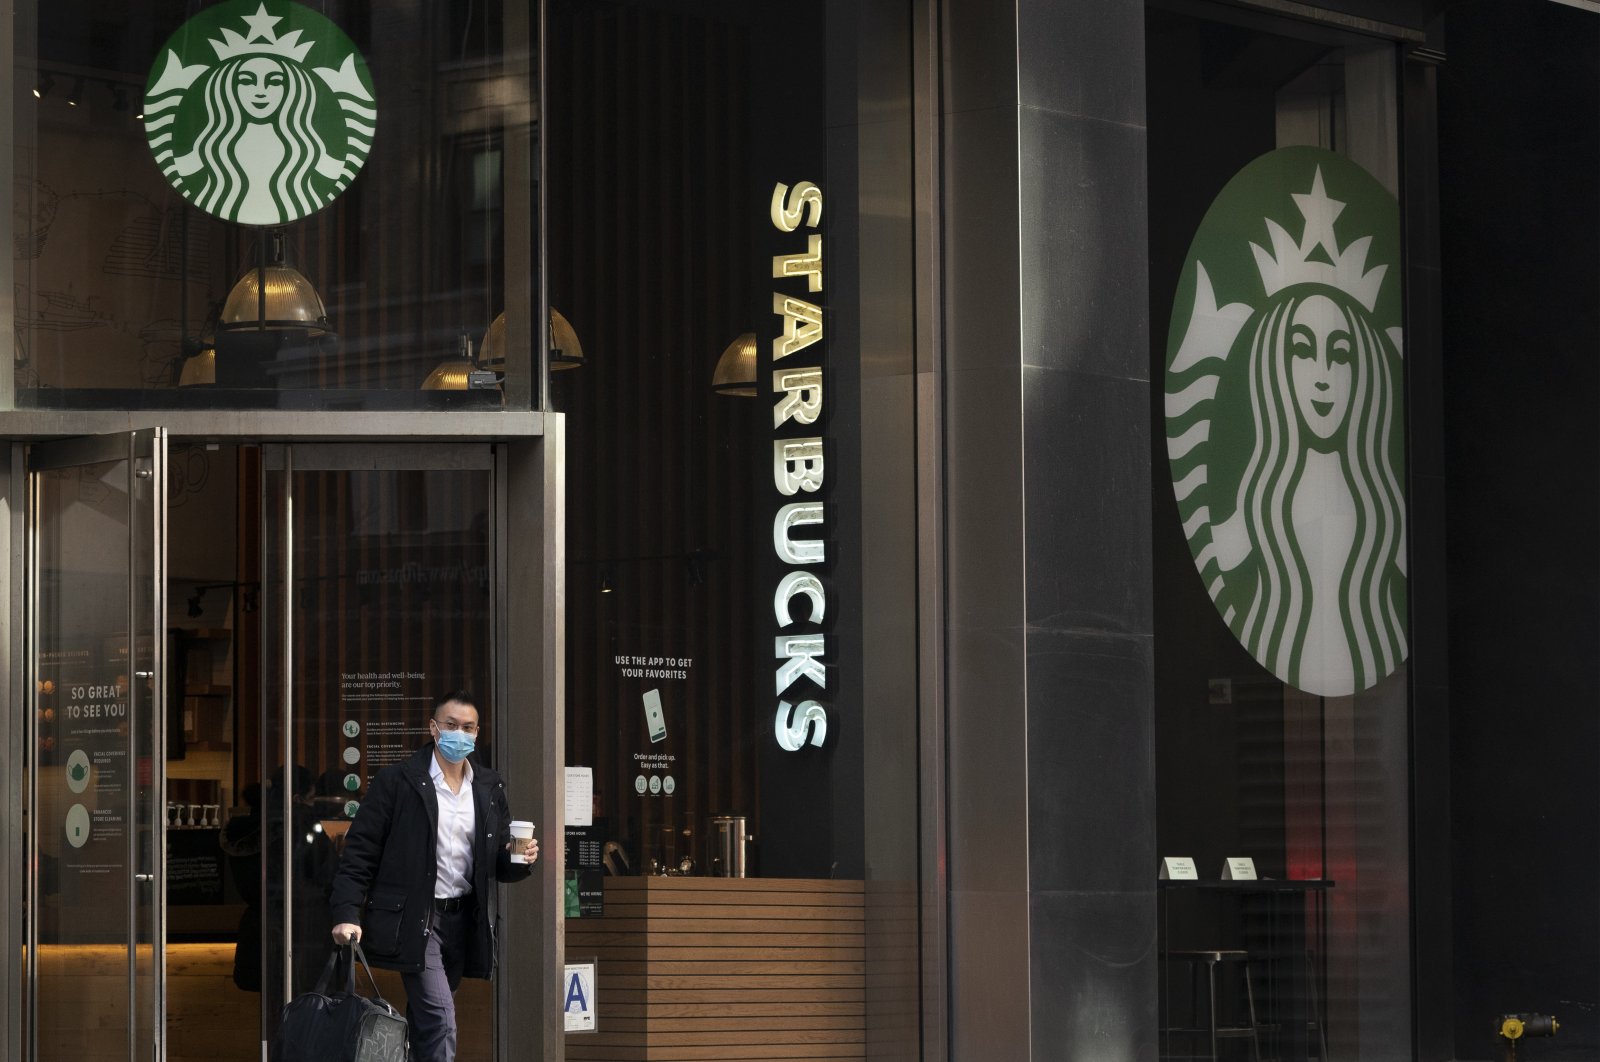 A man carries a beverage as he walks out of a Starbucks coffee shop in New York, U.S., Jan. 19, 2021. (AP Photo)